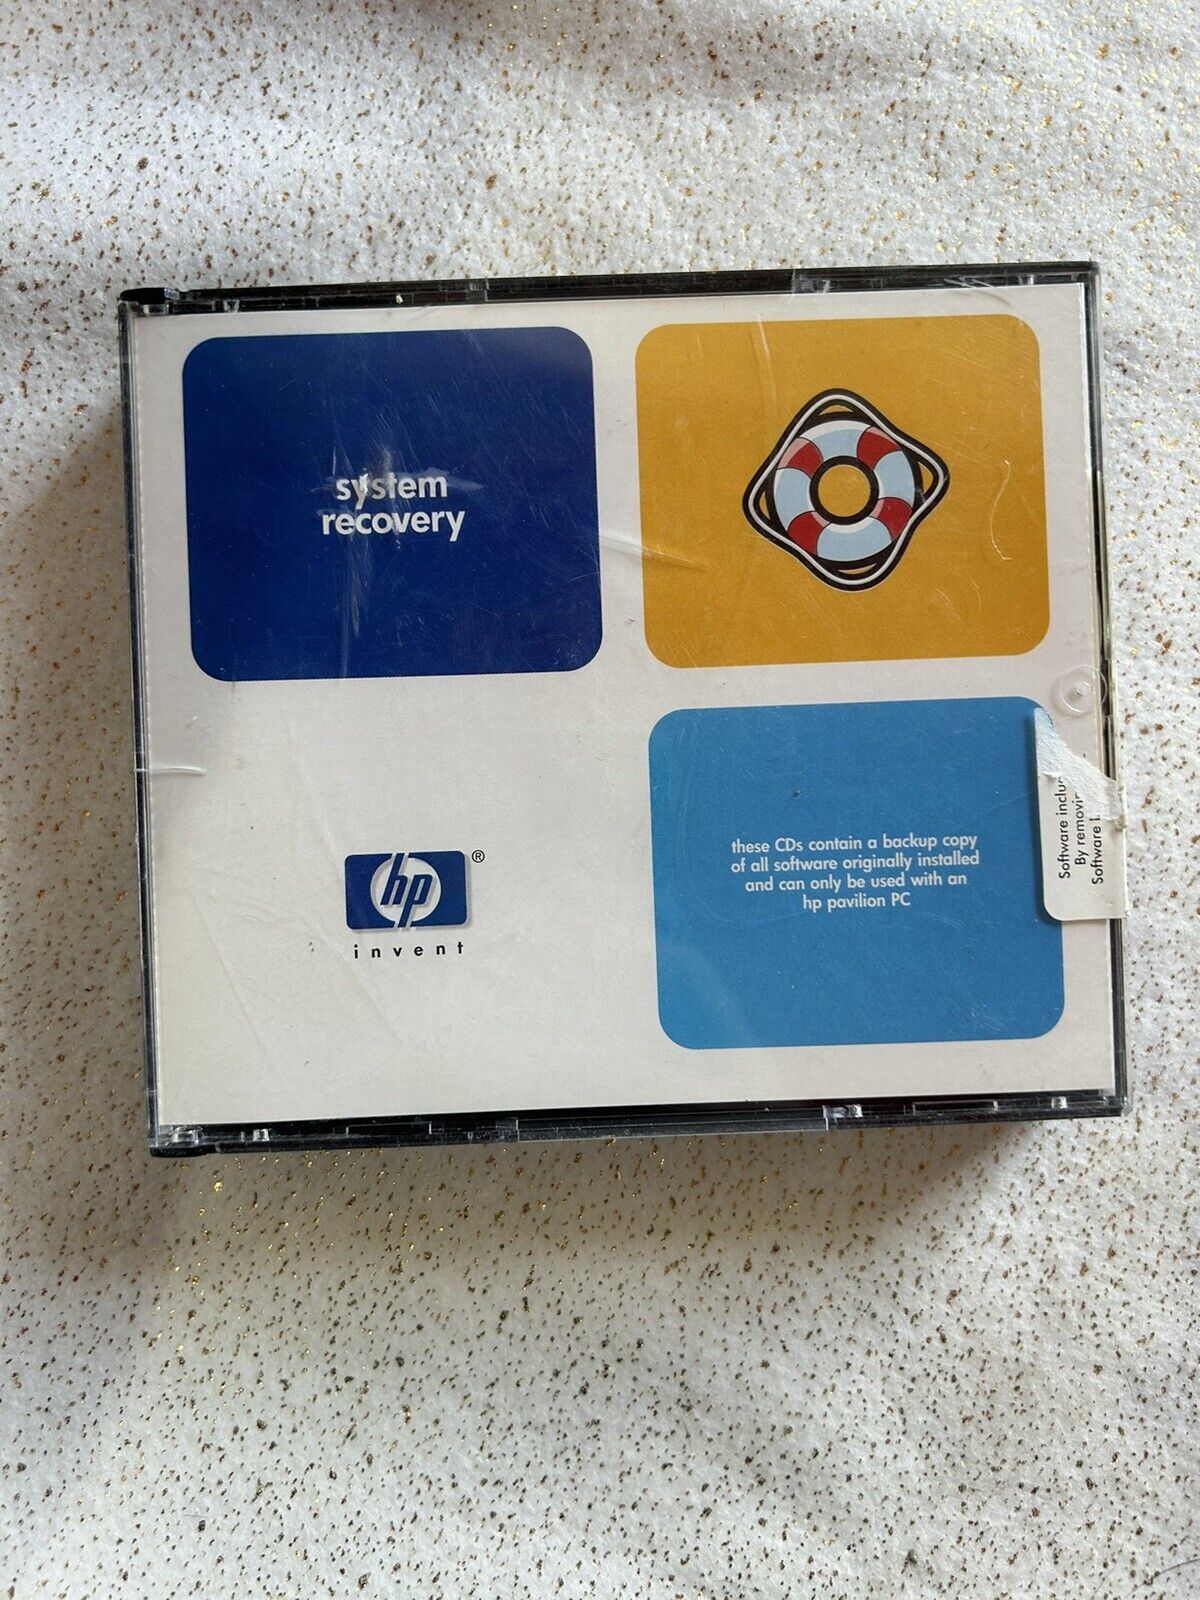 HP Pavilion System Recovery - Vintage 3 Disc Pack